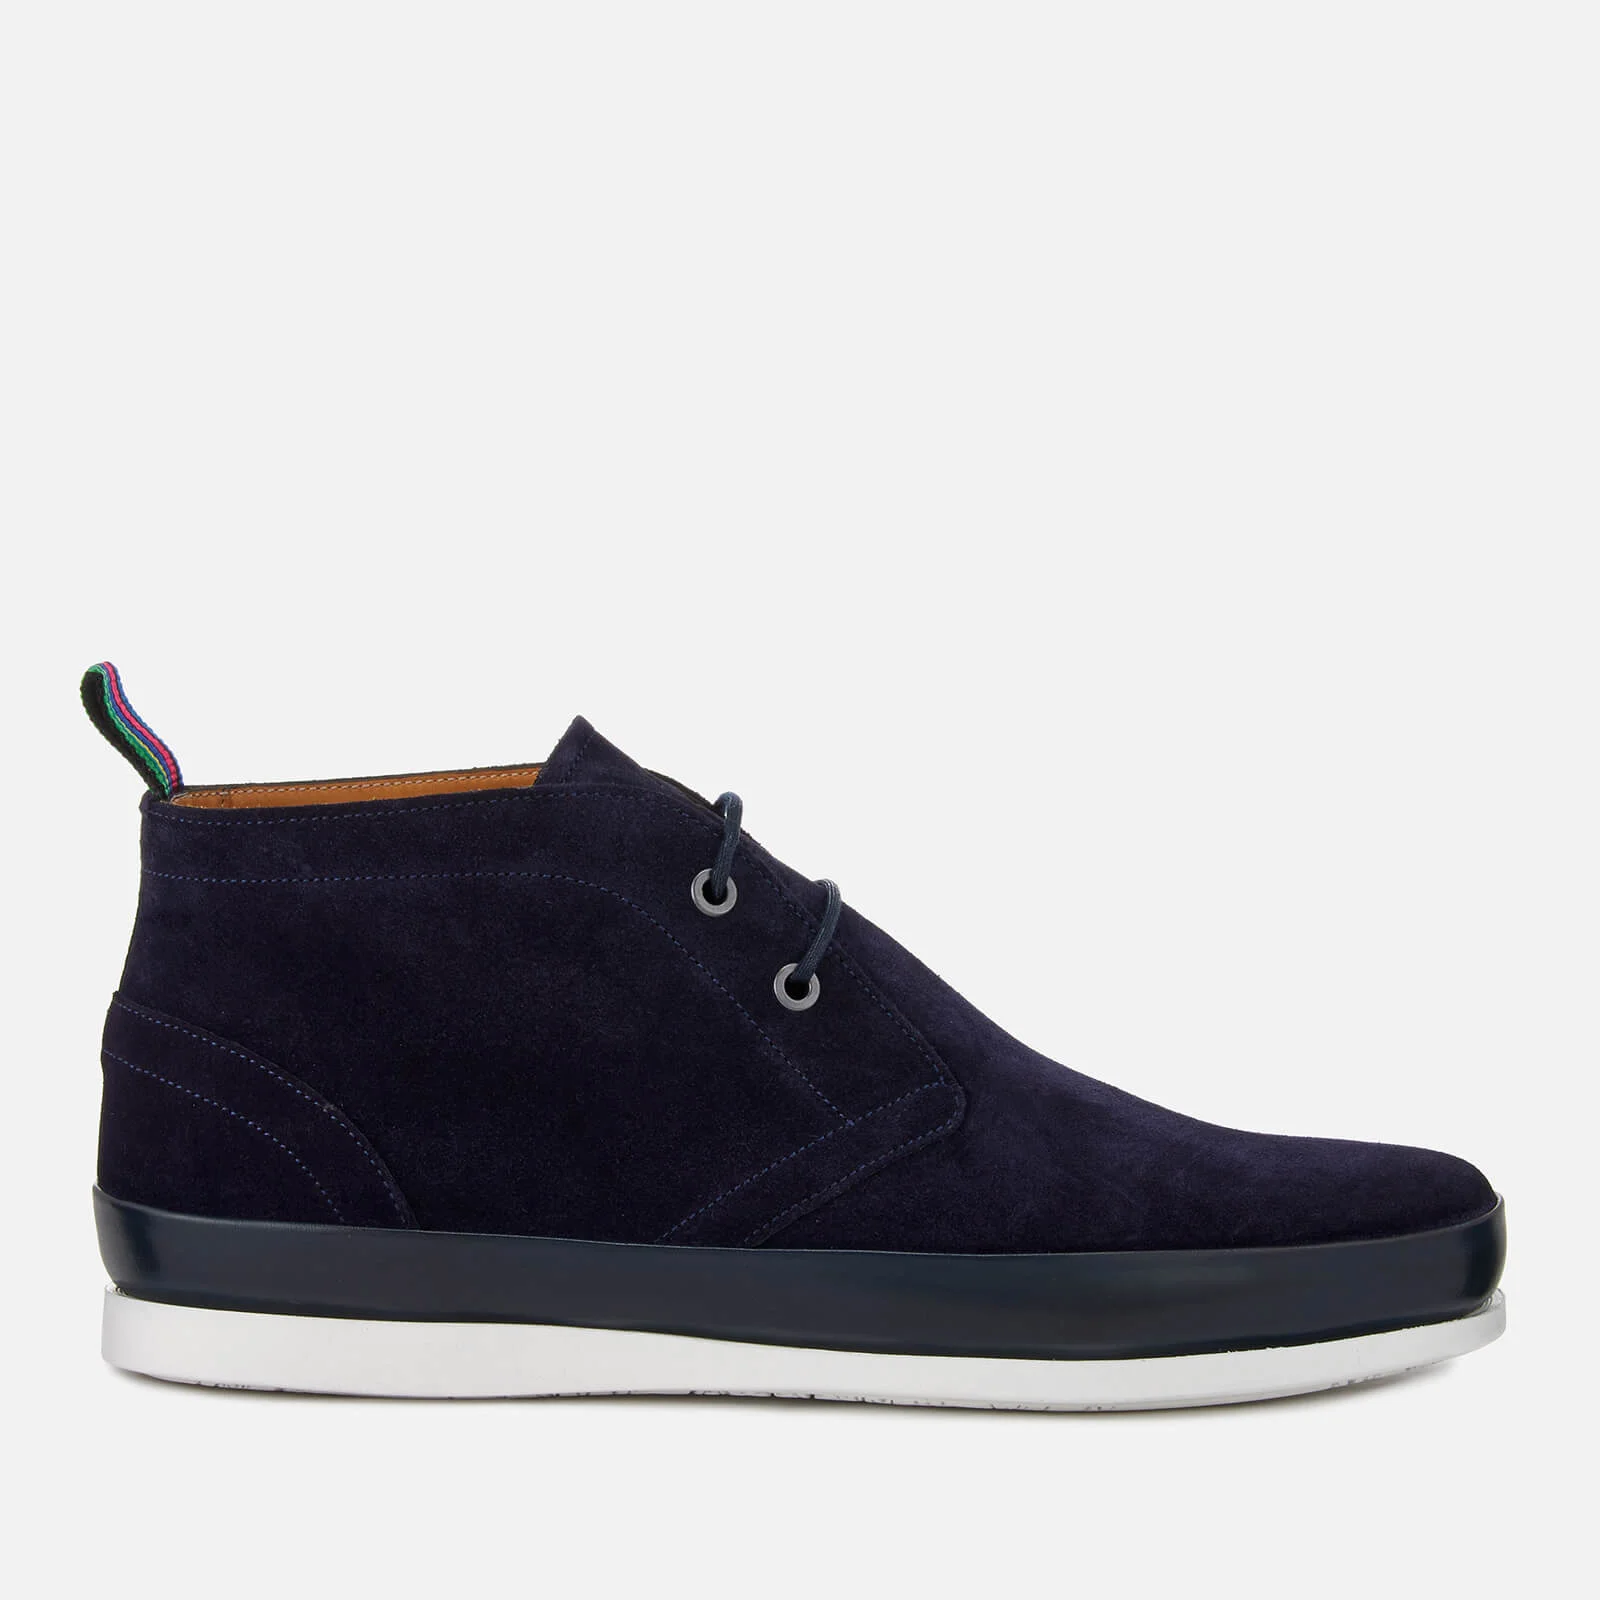 PS by Paul Smith Men's Cleon Suede Lace Up Boots - Dark Navy Image 1